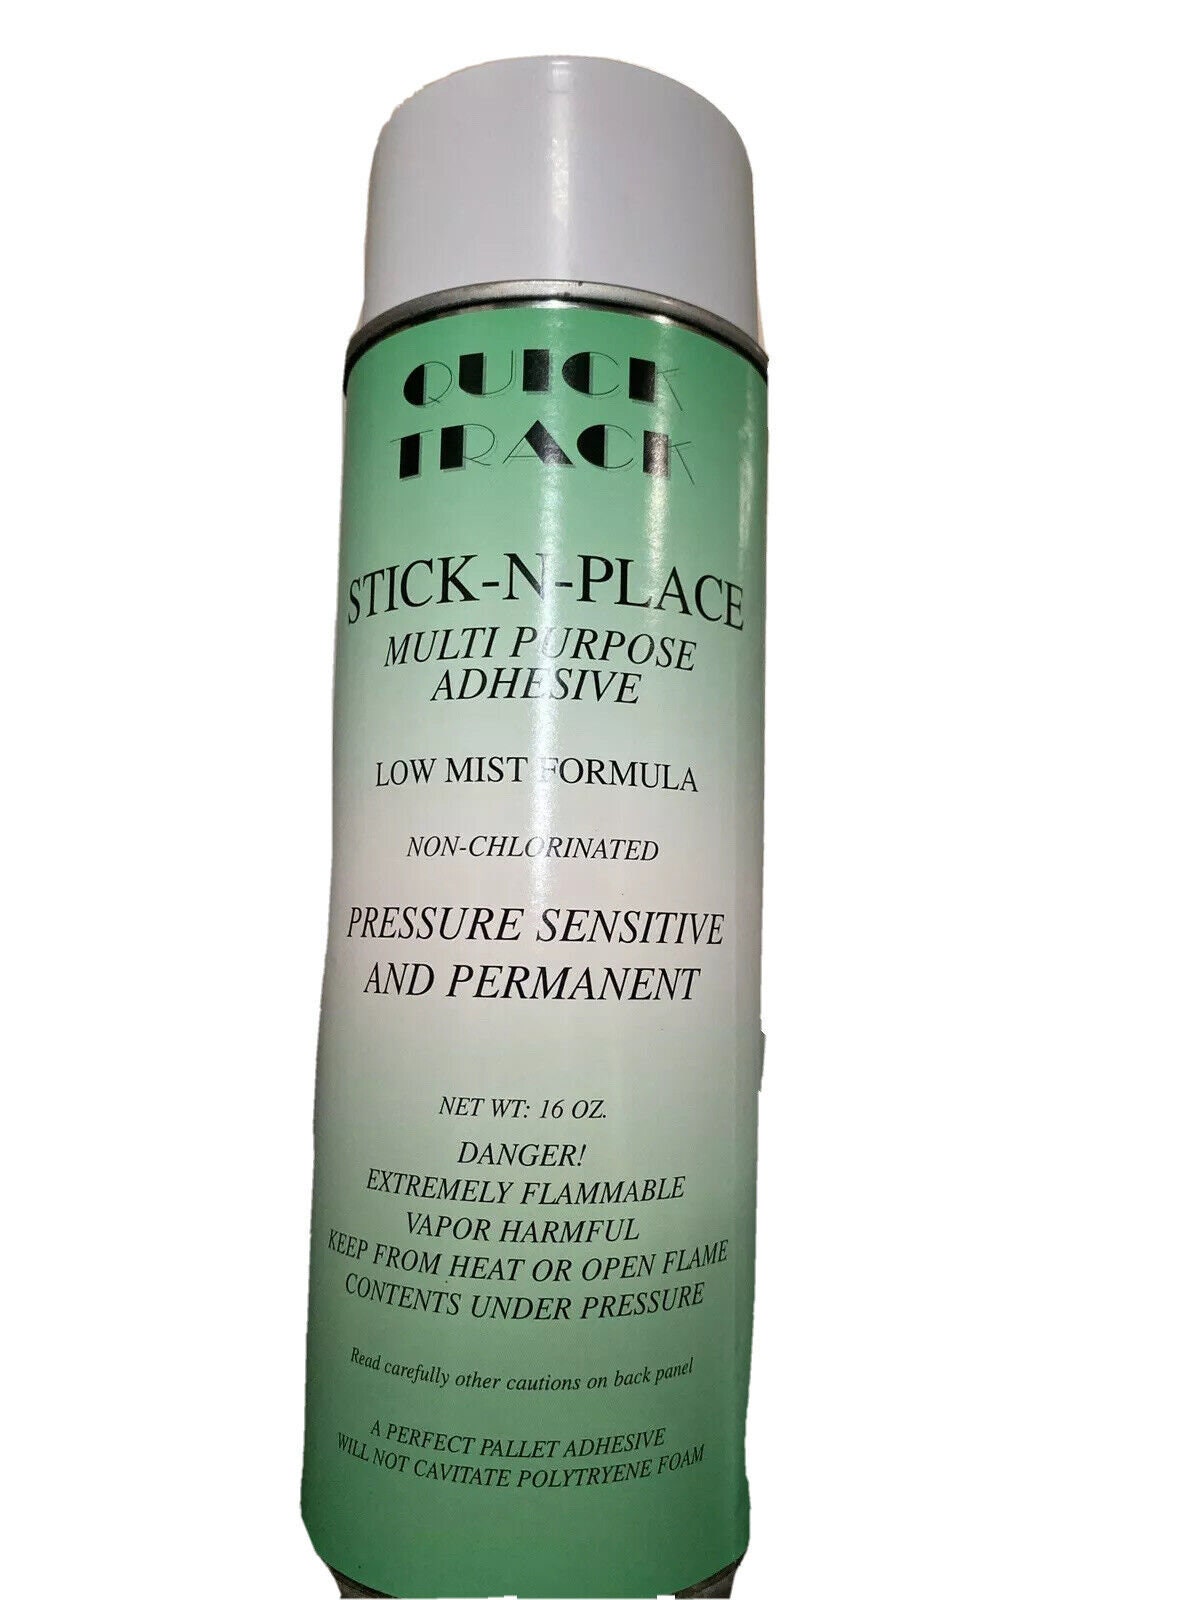 Scenic Spray Glue 100ml by Deluxe Materials 